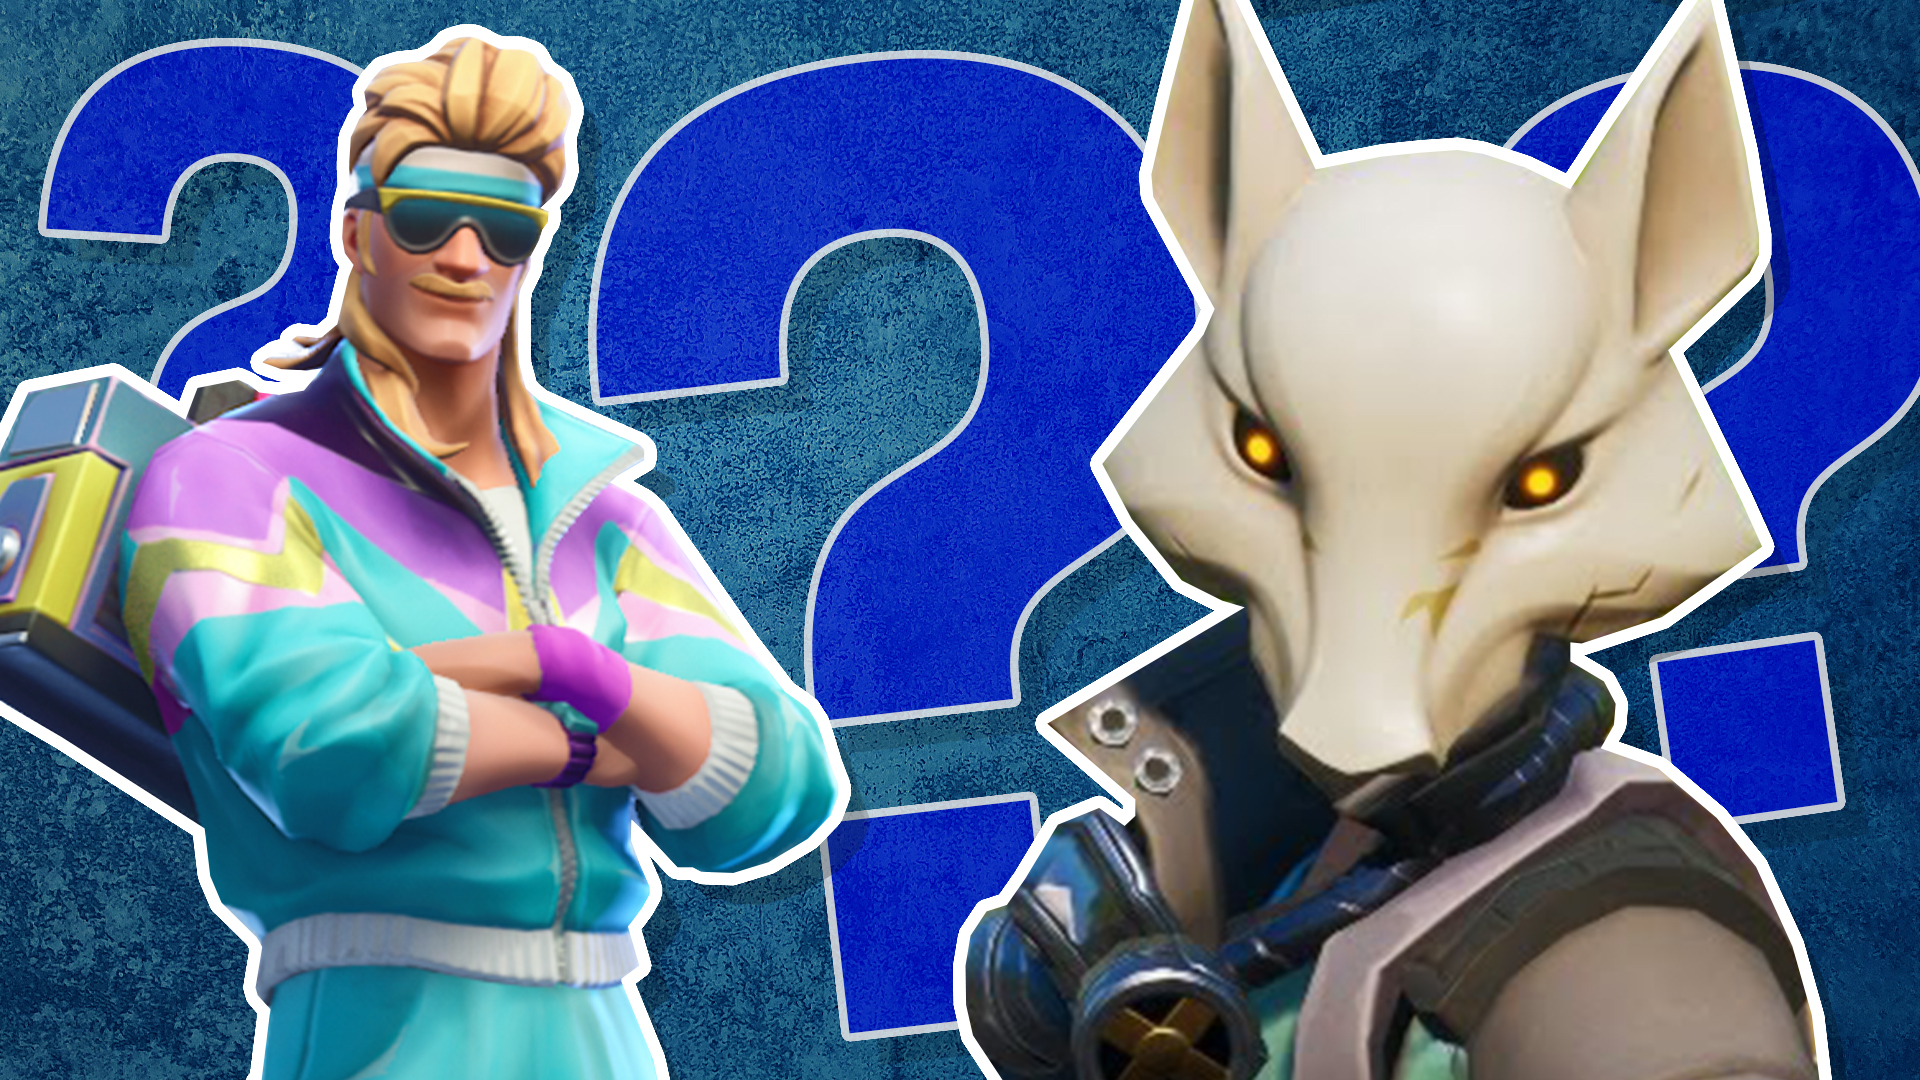 Fortnite Quizzes, 100+ Gaming Questions & Trivia